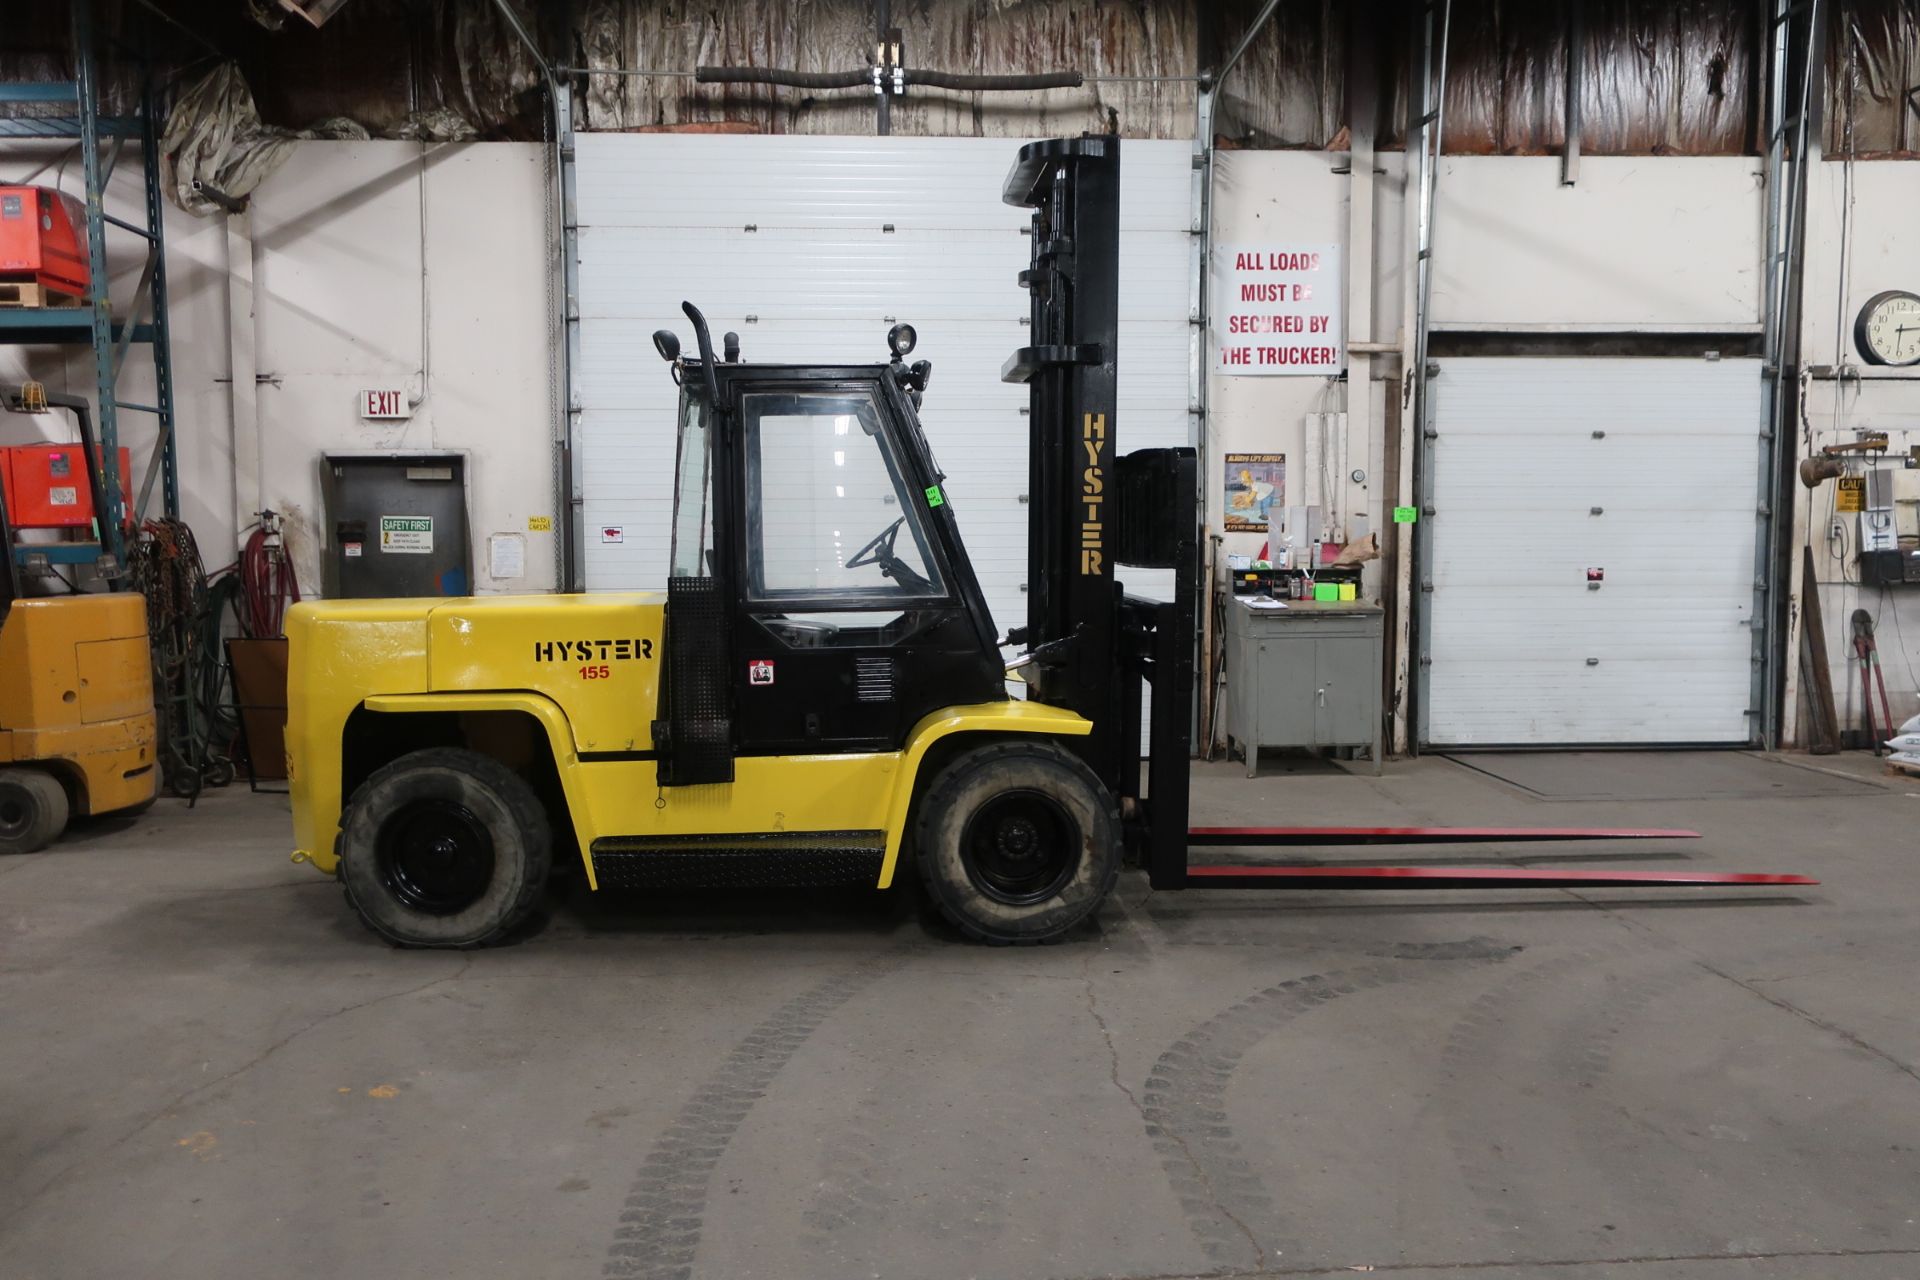 FREE CUSTOMS - Hyster 15500lbs Capacity OUTDOOR Forklift Diesel with sideshift DUAL FRONT TIRES